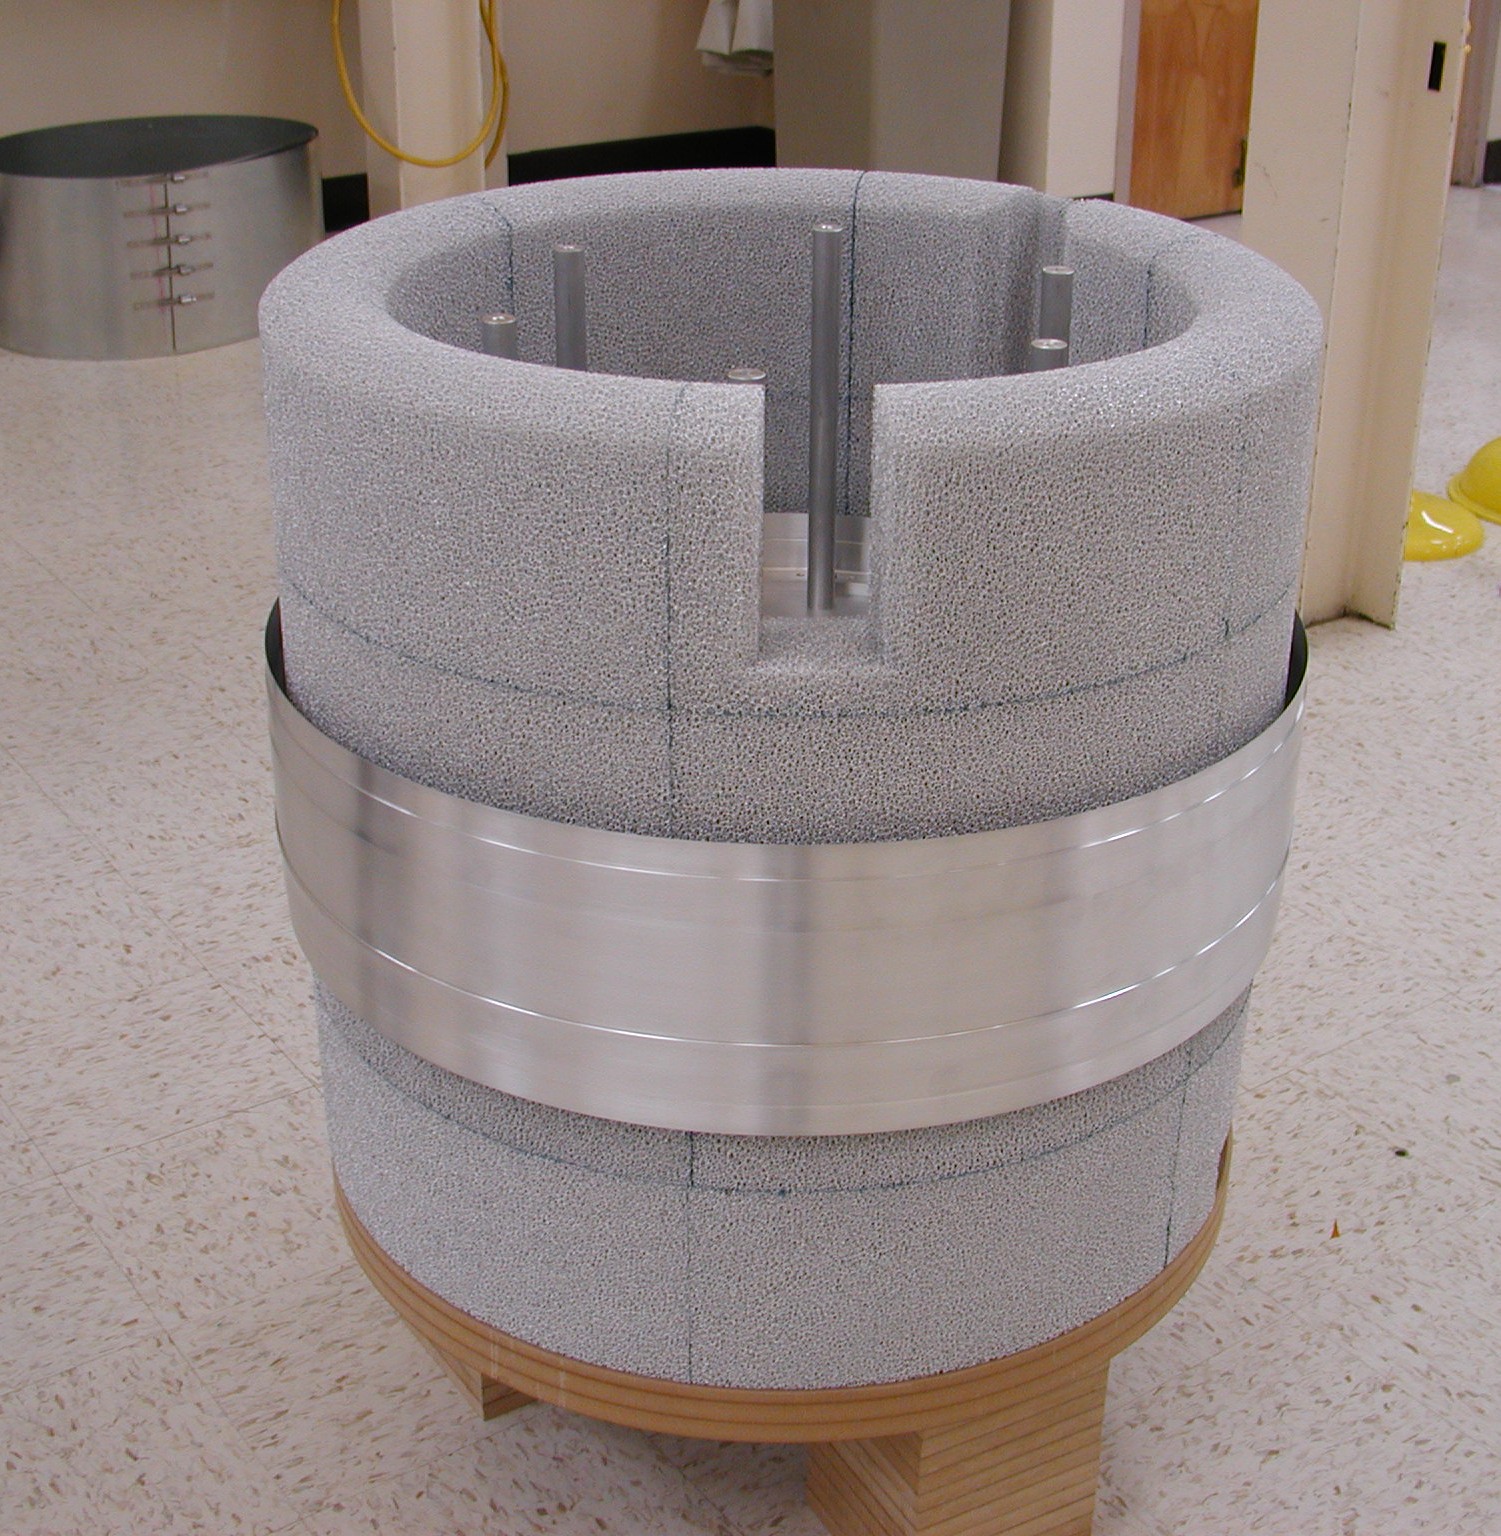 An image of the cyrostat secondary tank's aluminum foam.  Resembles a white-gray covered barrel, with a wide strip of silver-colored, reflective coating around the center.